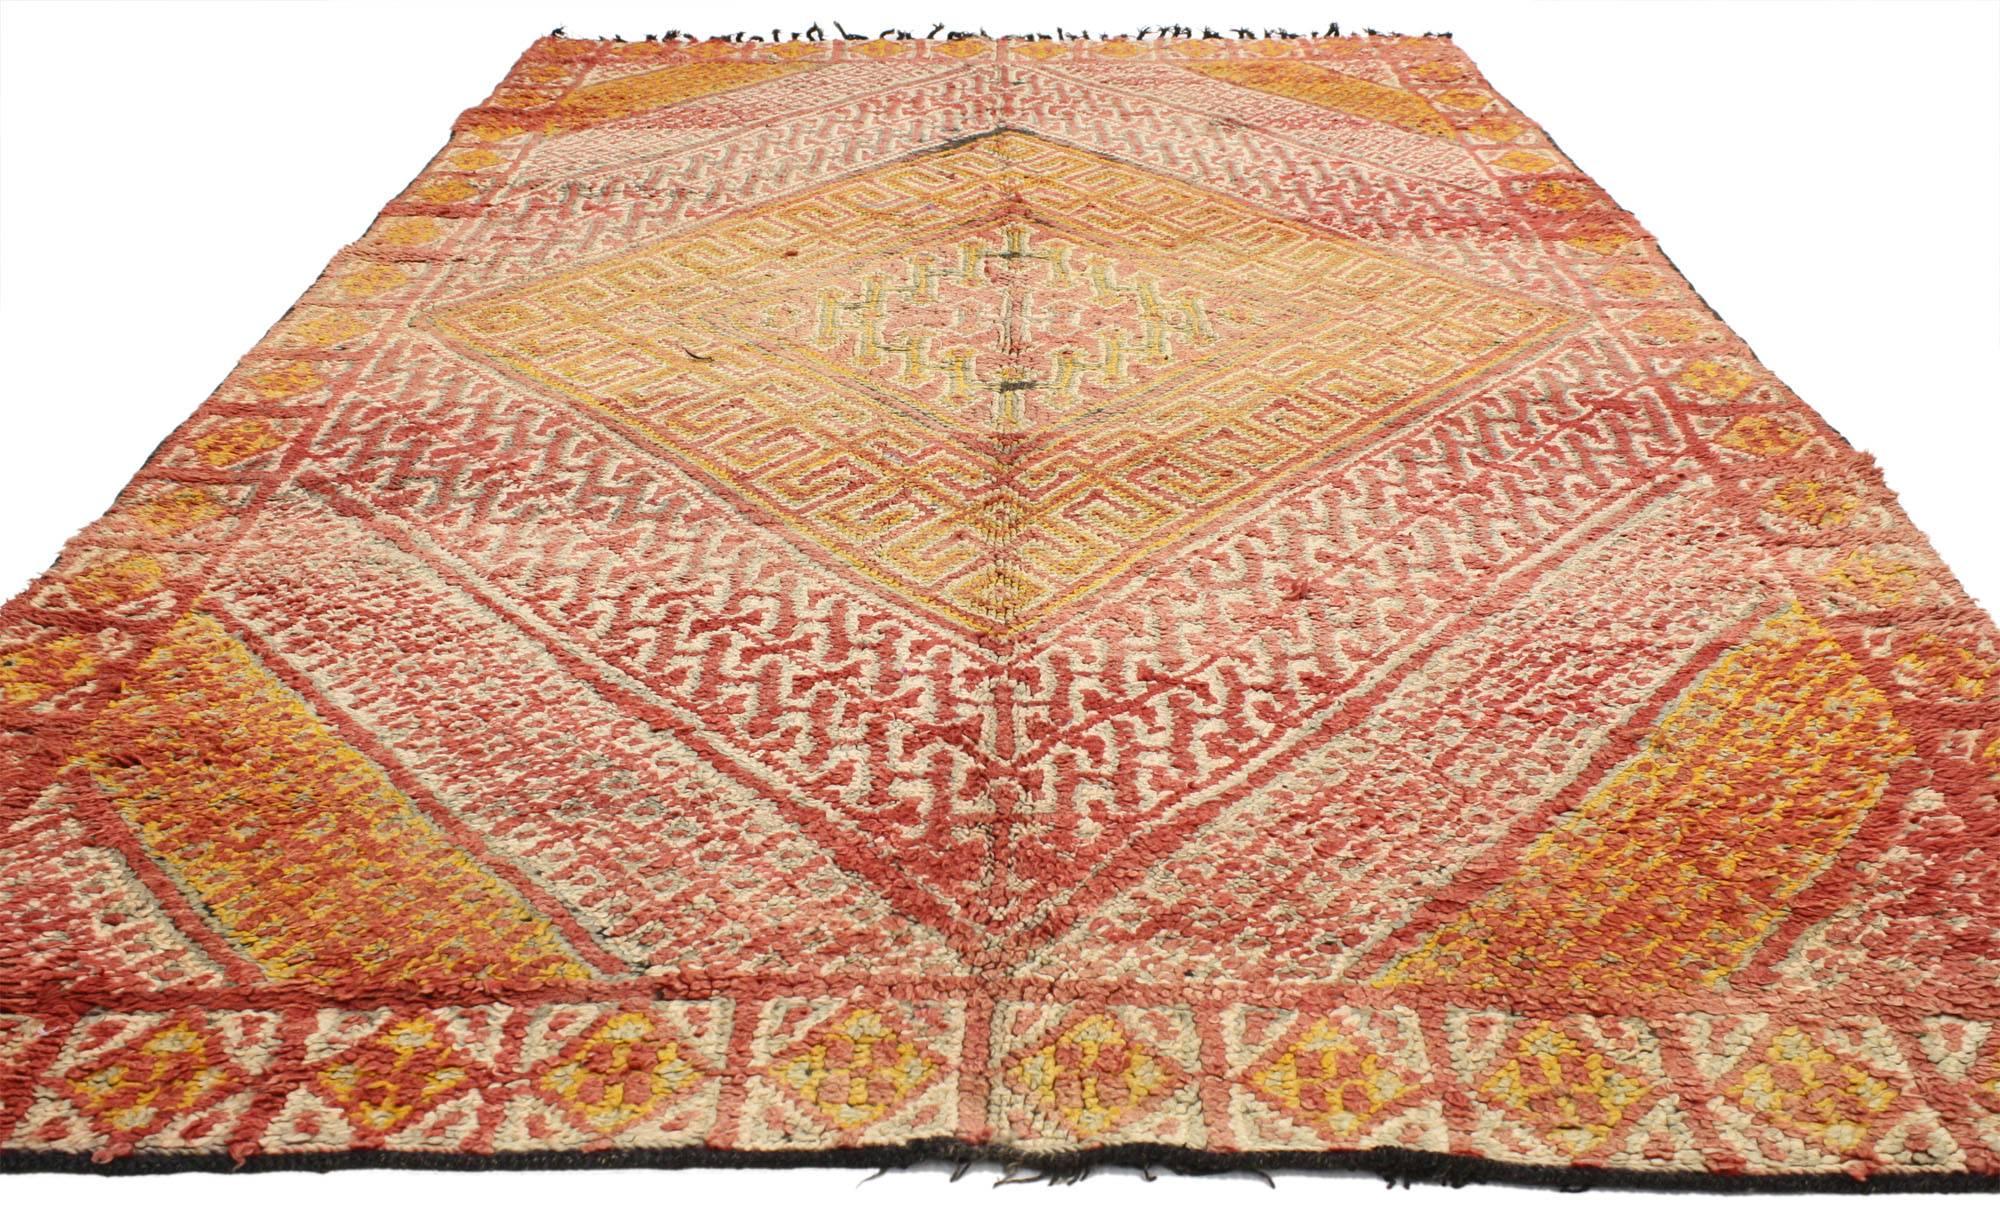 20610 vintage Berber Moroccan rug with tribal style. Subdued hues of fiery red and glowing orange awaken the senses while evoking images of a warm Moroccan sunrise. Intricate geometric patterns house themselves within the larger arrangement of